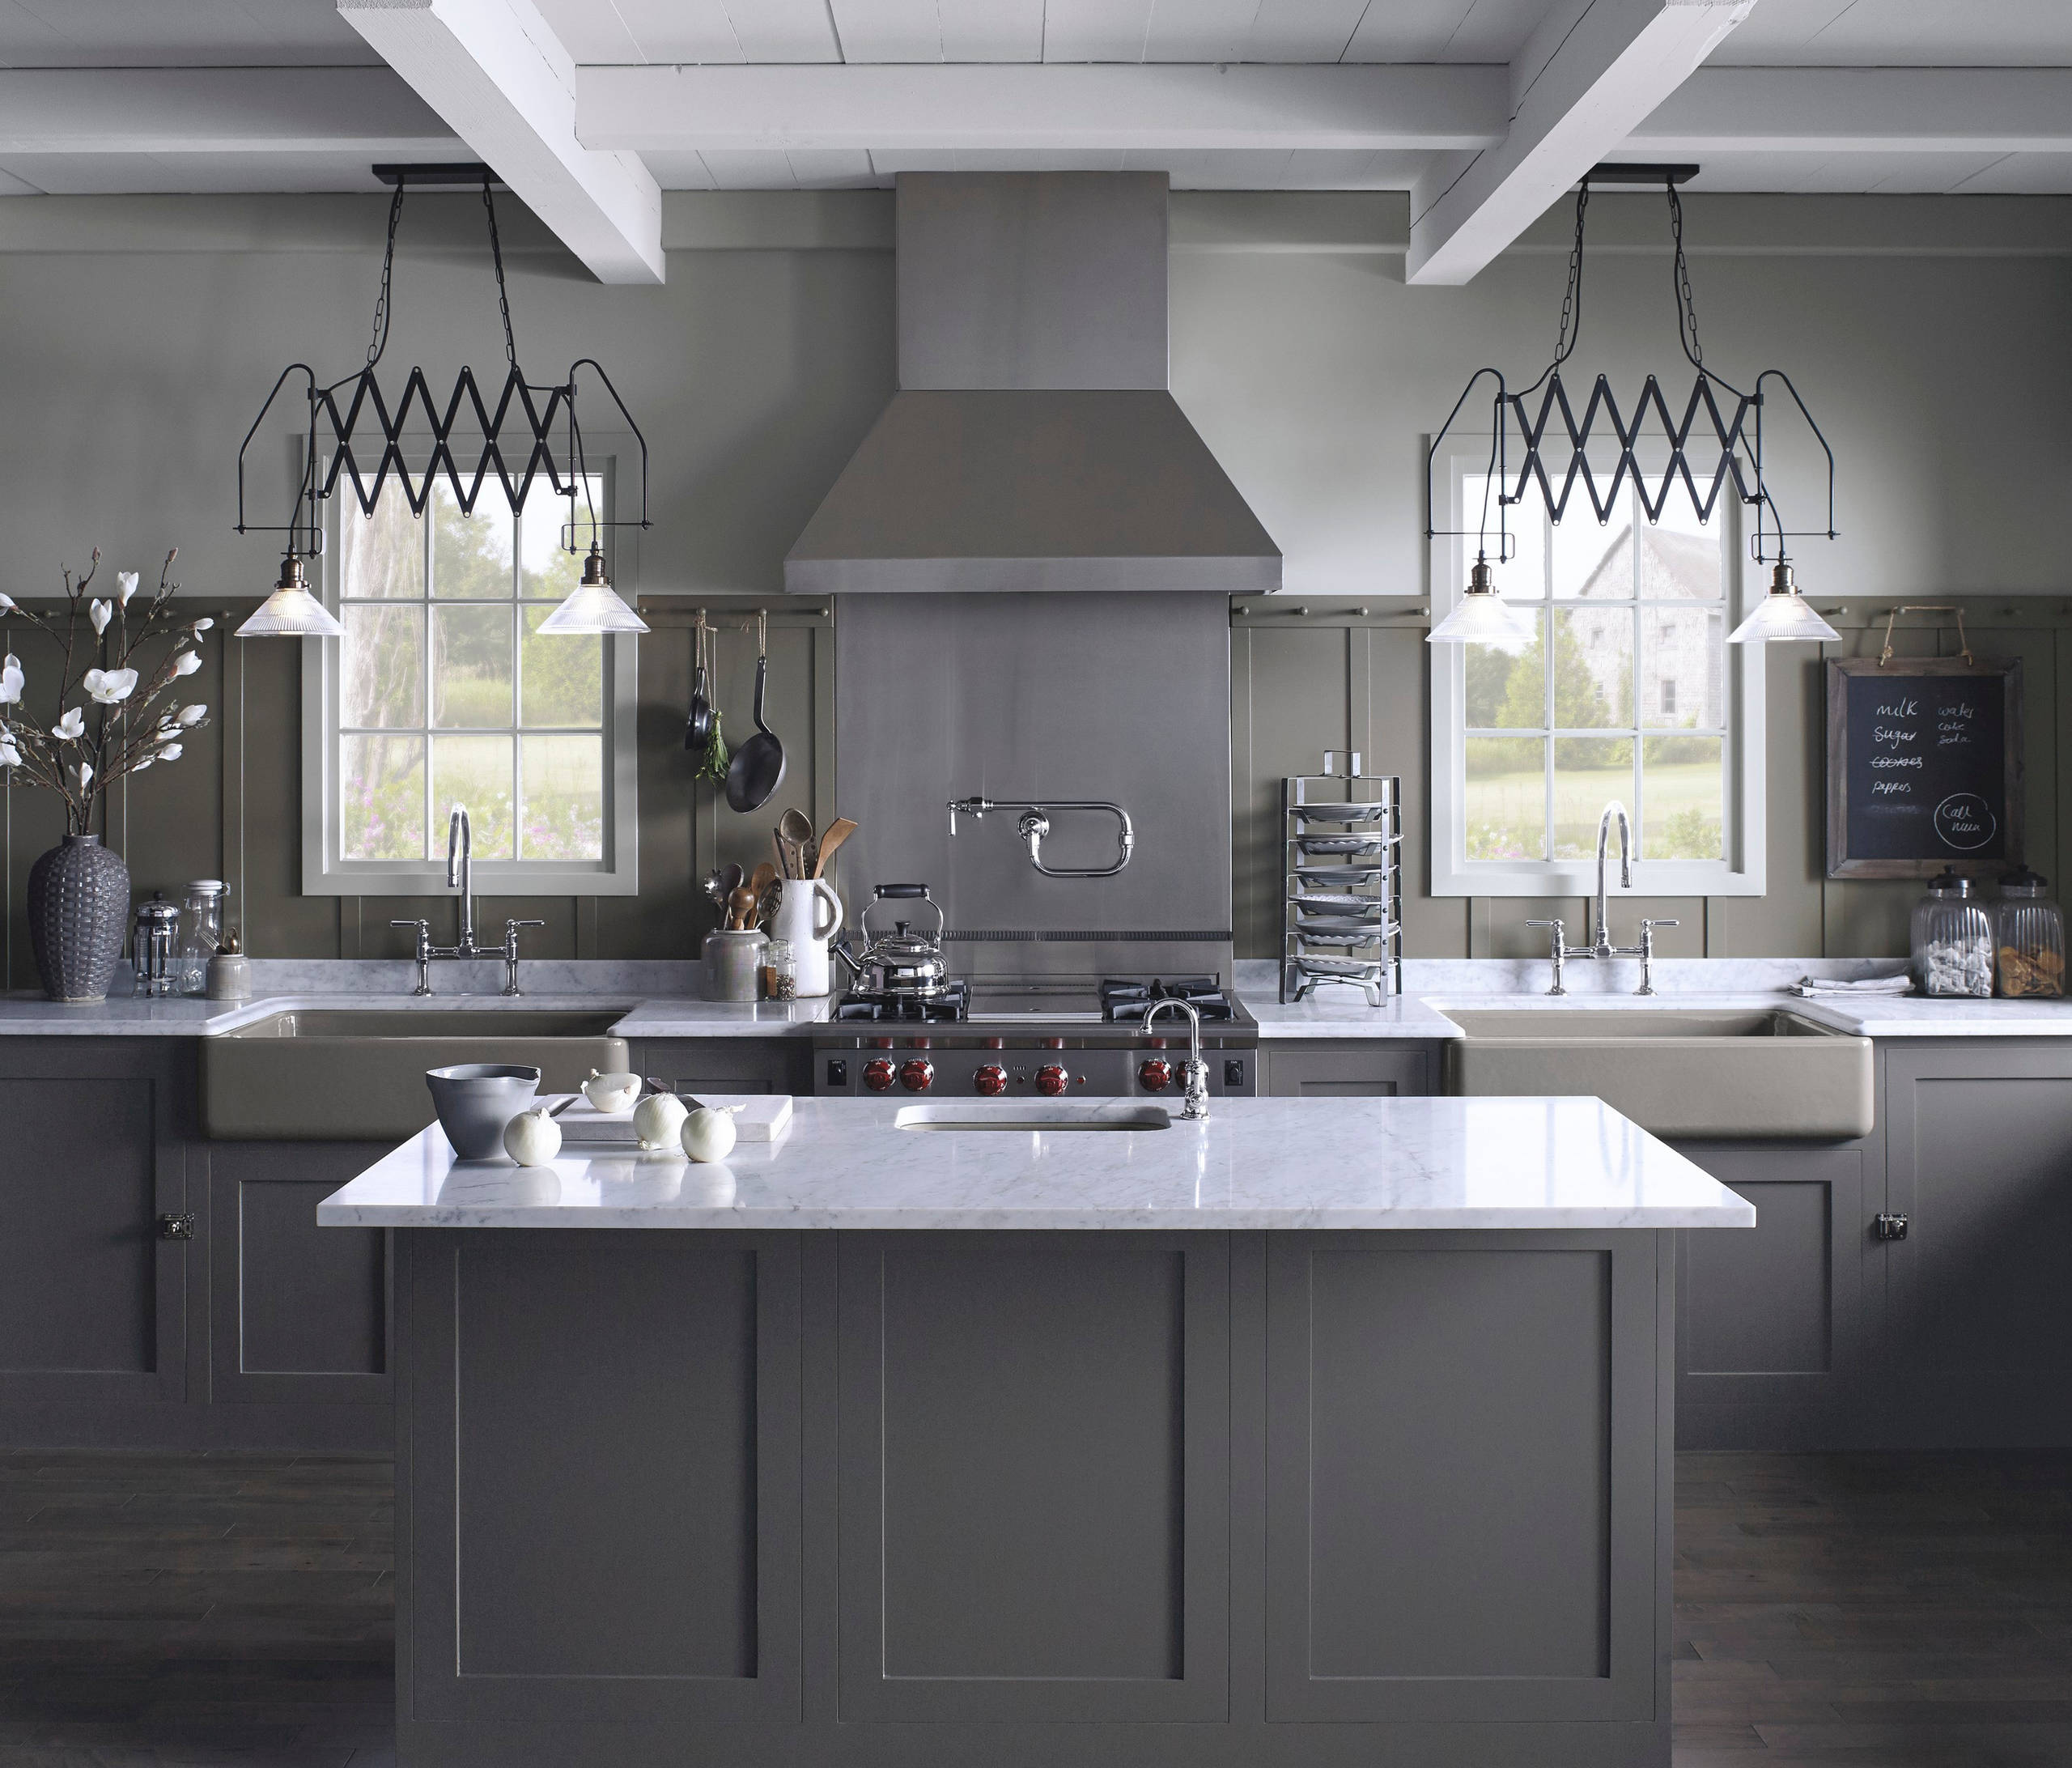 Benjamin-Moore-Iron-Mountain-Kitchen-cabinets-and-island - Interiors By